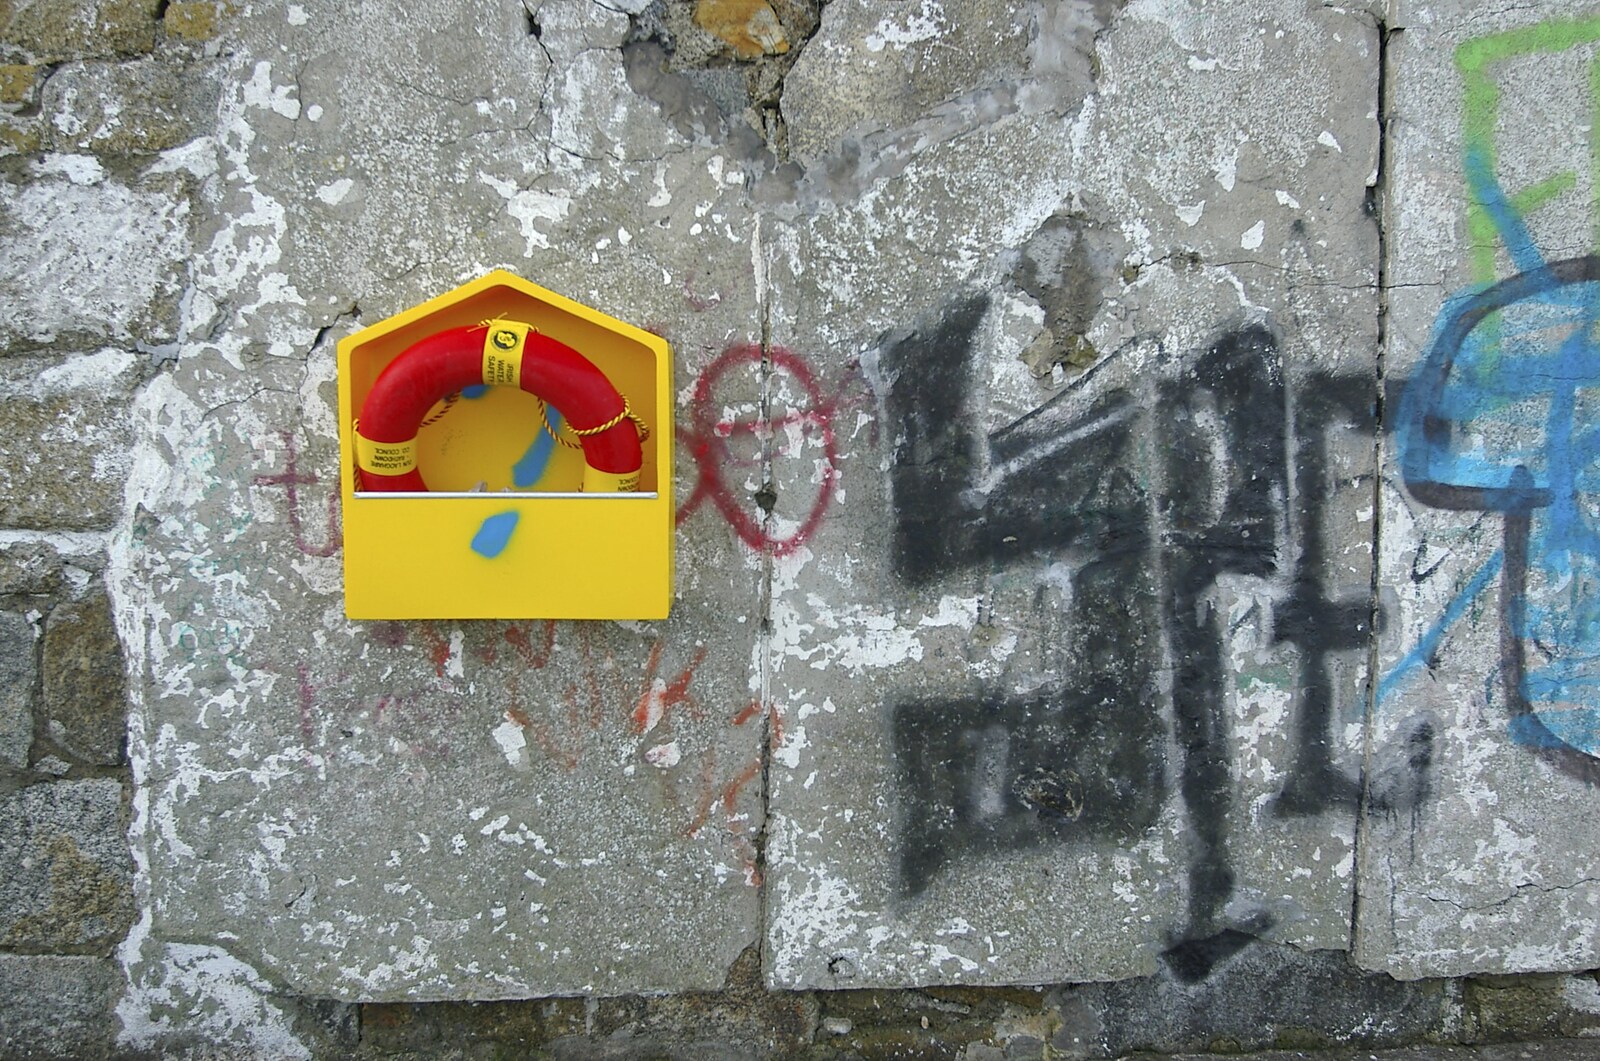 A life belt and some graffiti on the sea wall from Blackrock Mornings, Dublin County, Ireland - 29th October 2006